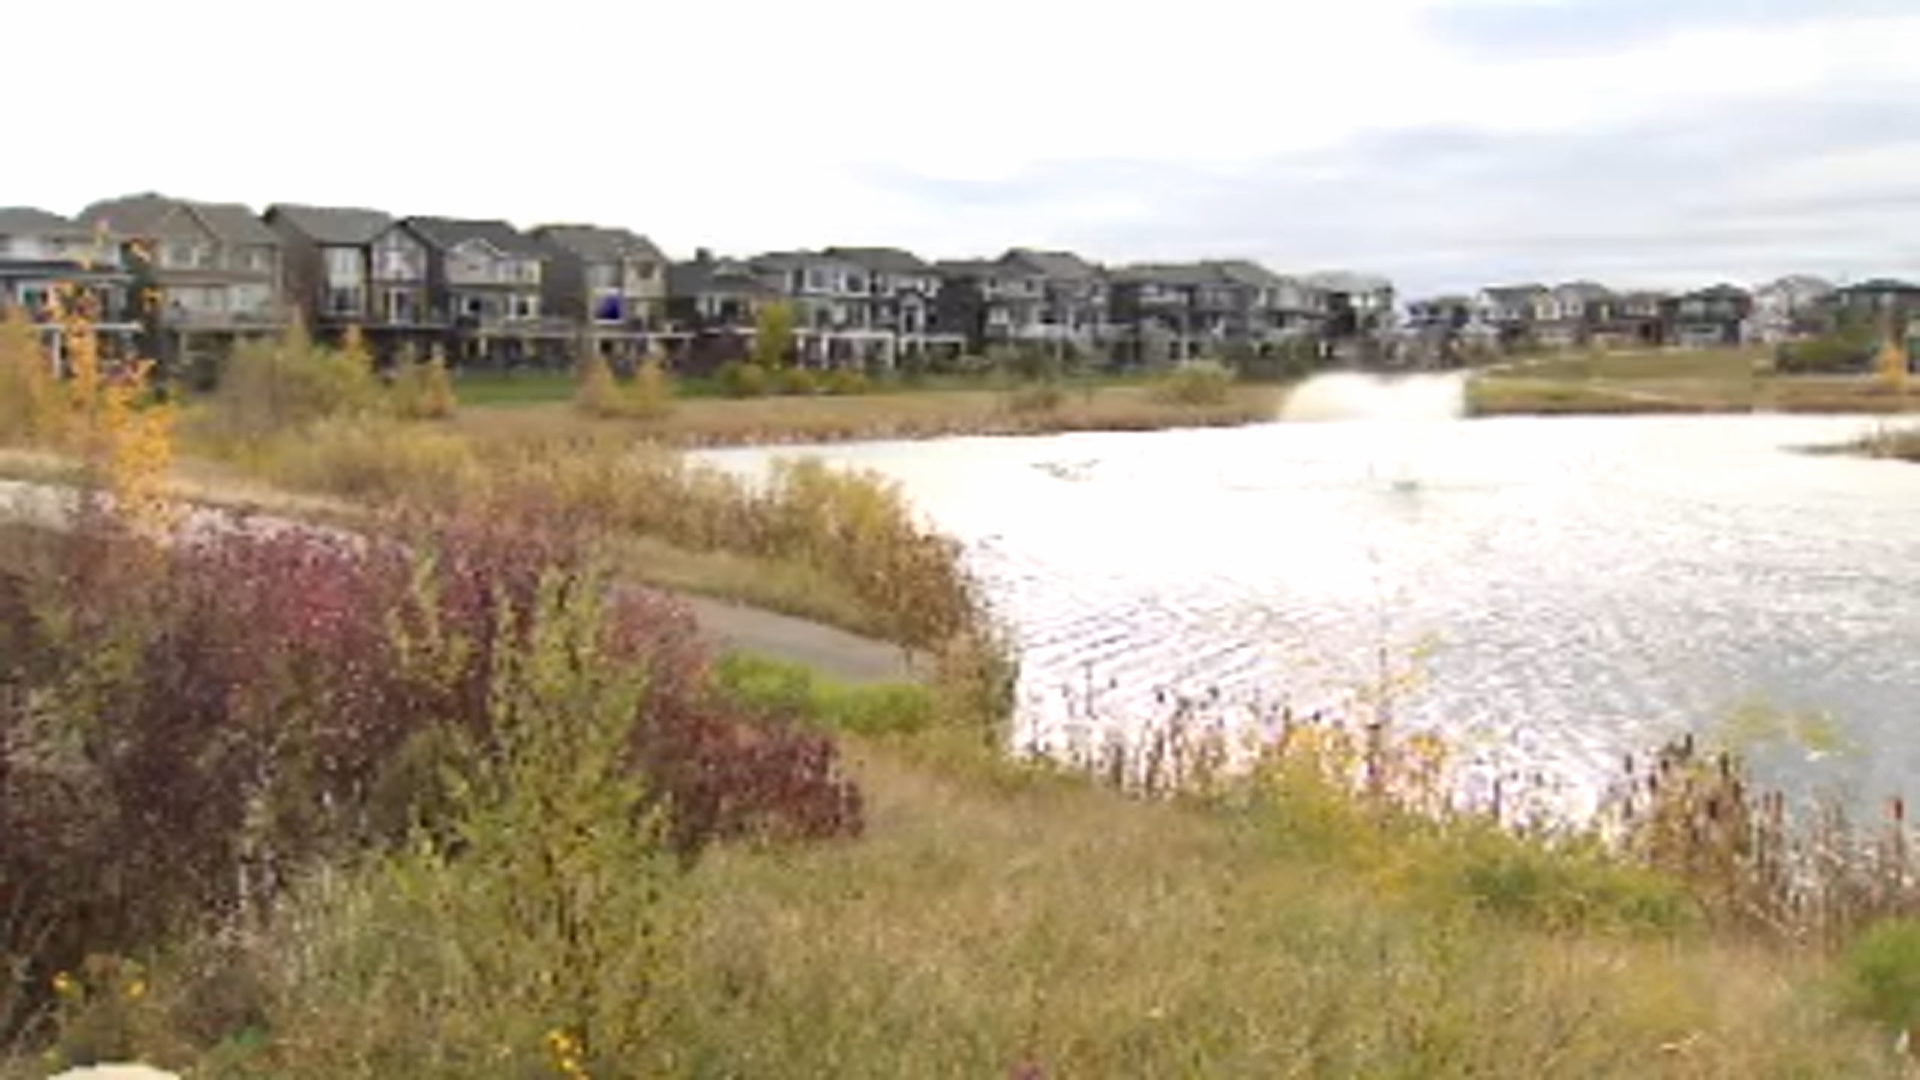 4-year-old dies in hospital nearly 2 weeks after being pulled from Airdrie pond